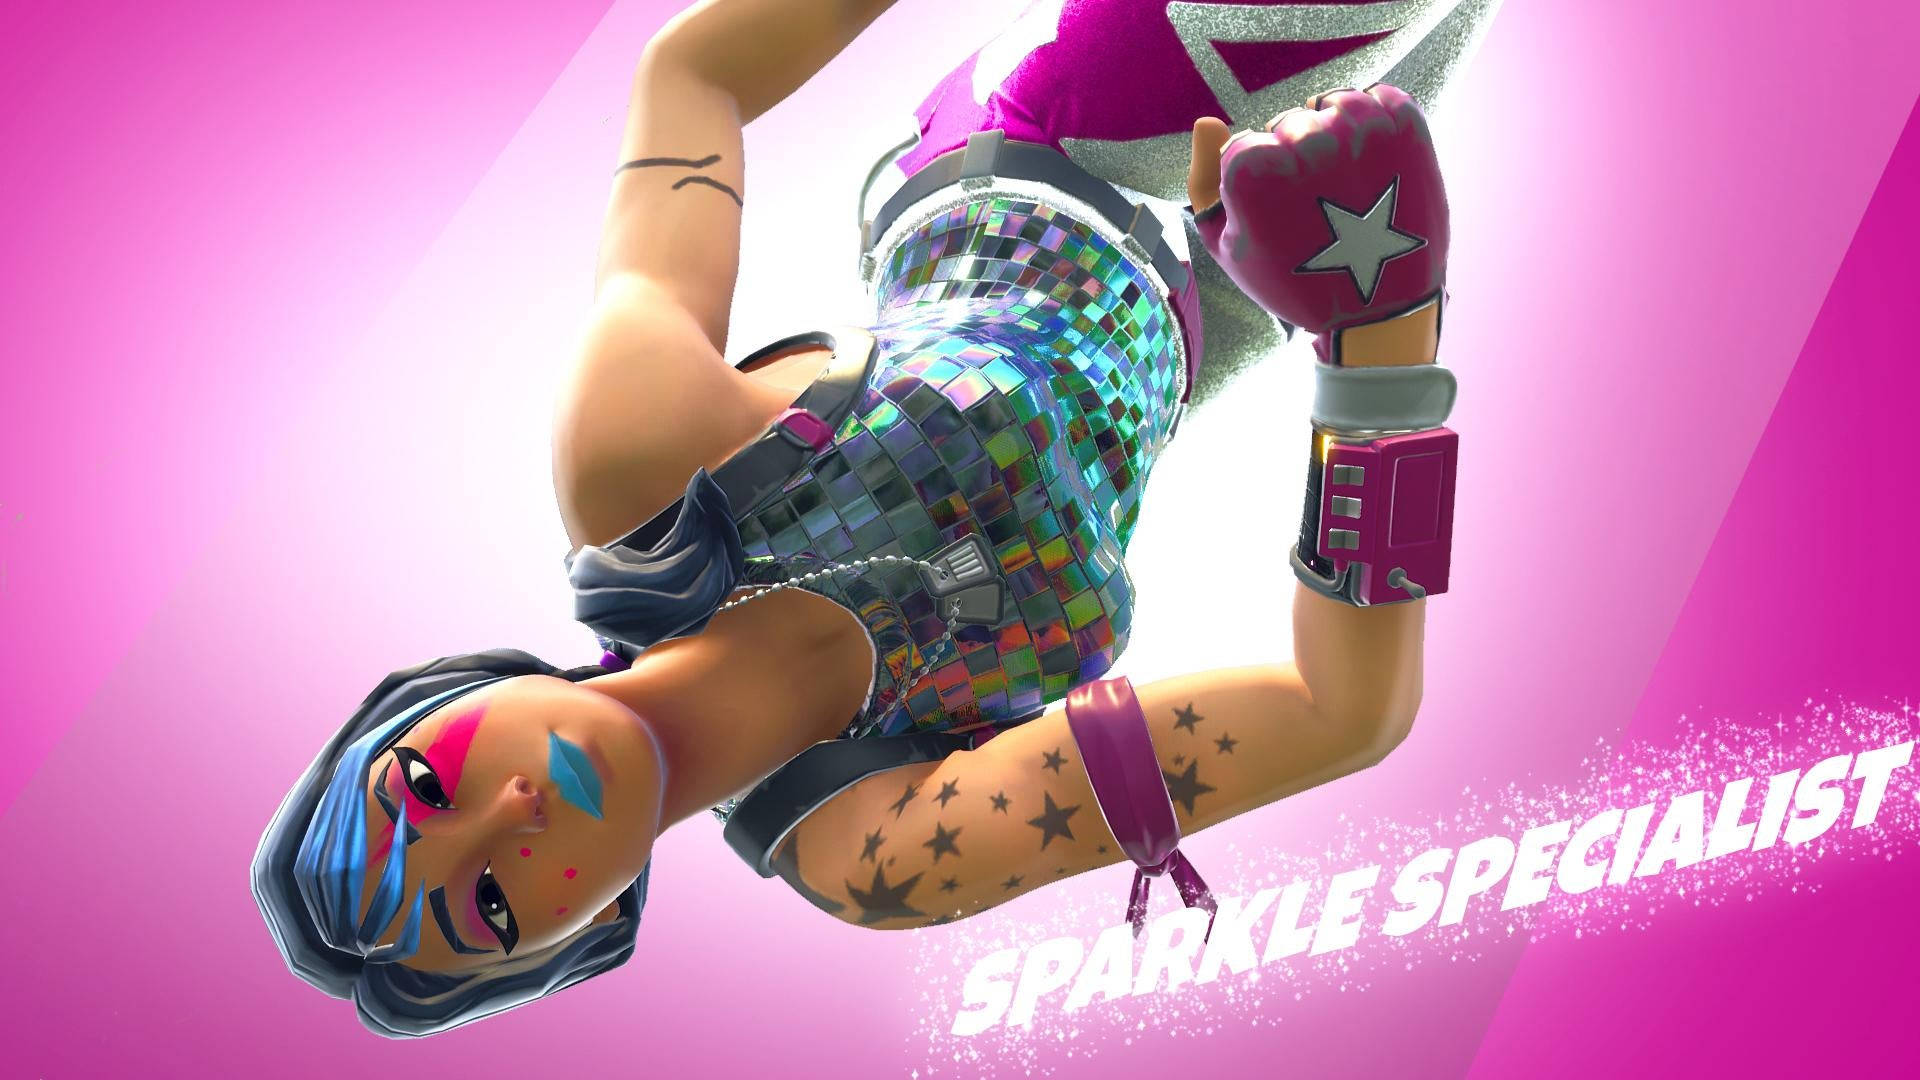 Get ready for the ultimate glow-up with Sparkle Specialist Outfit Wallpaper